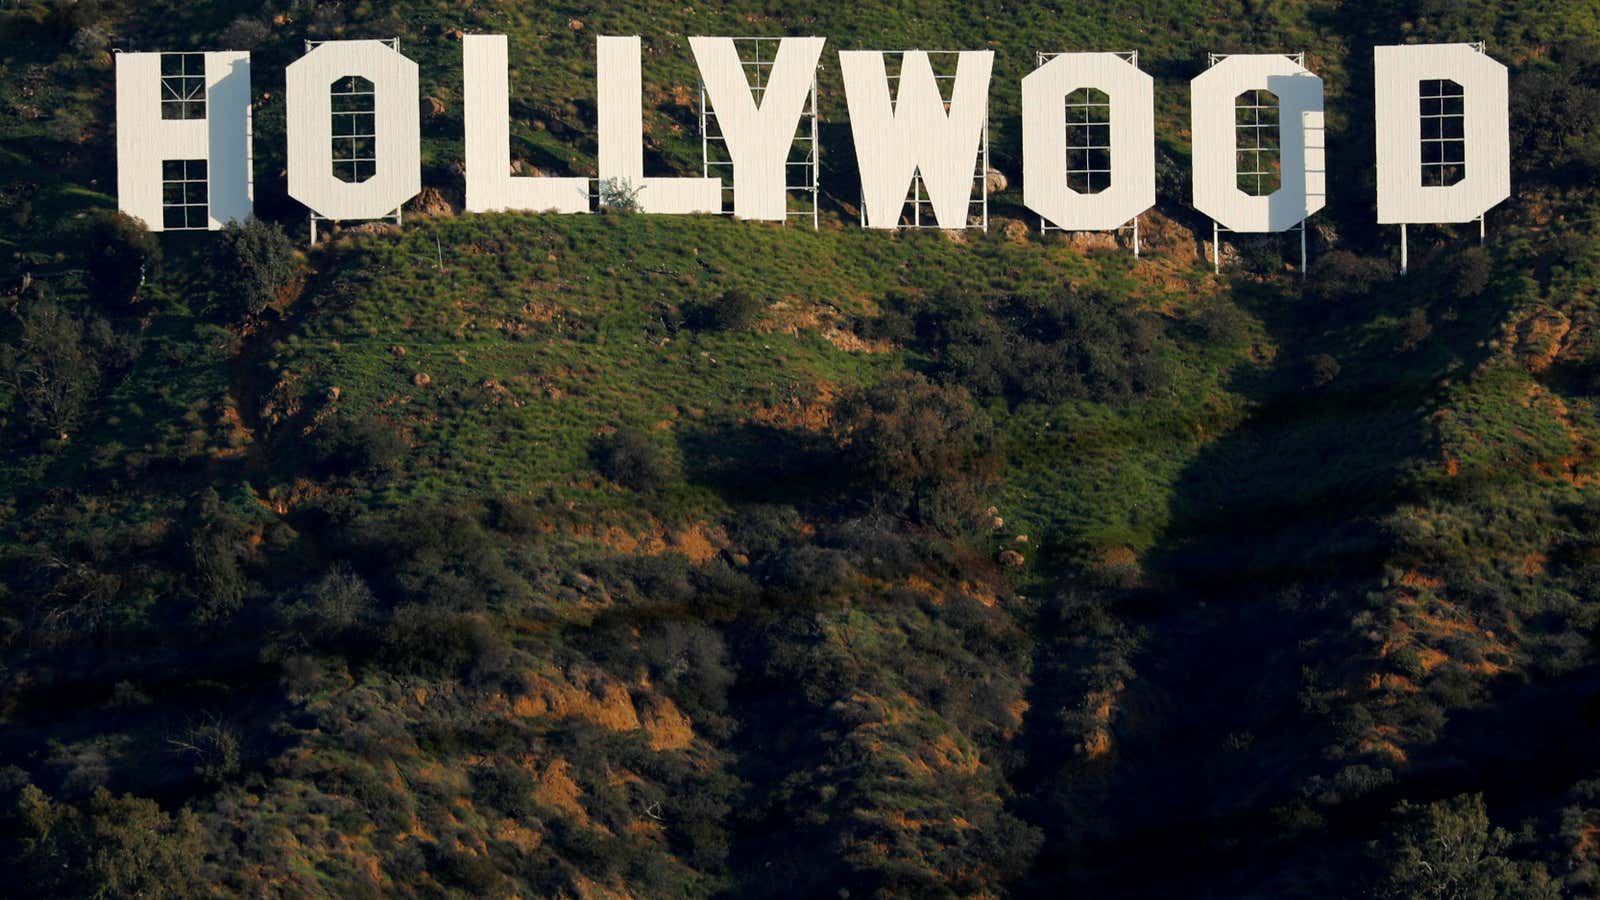 A film and television crew worker strike could extend well beyond Hollywood.